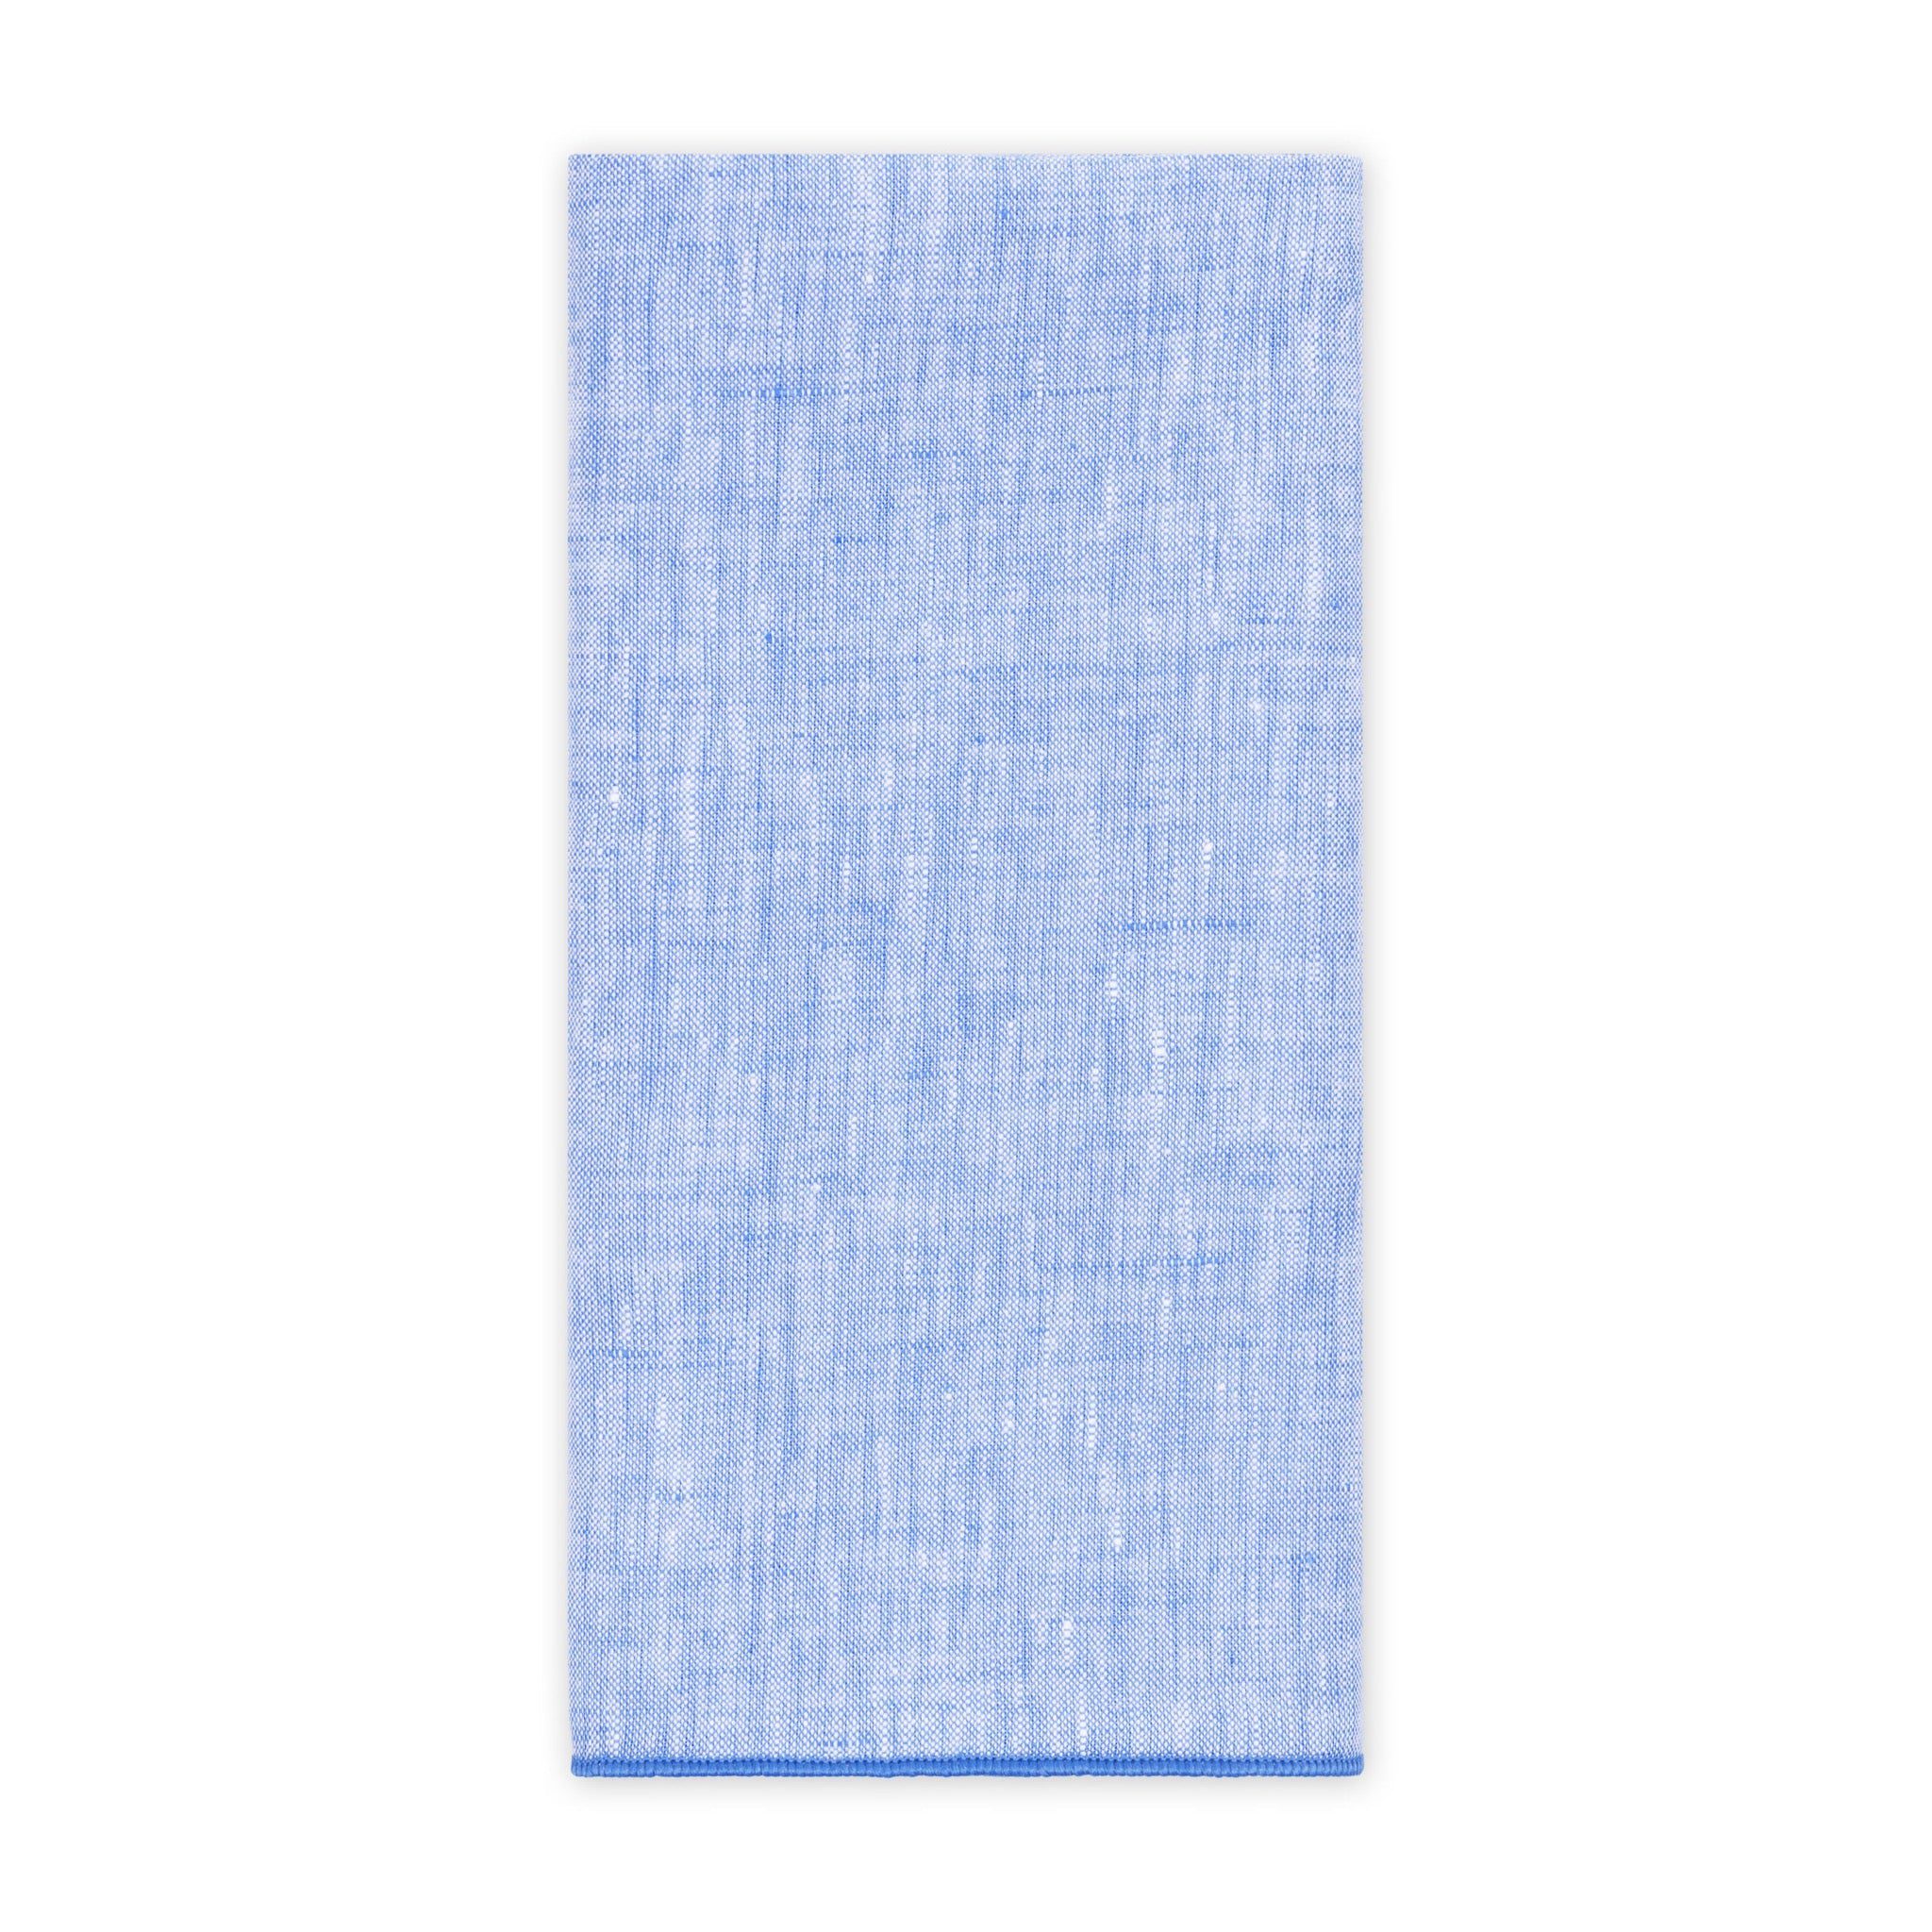 Blue Chambray Napkin from Proper Table